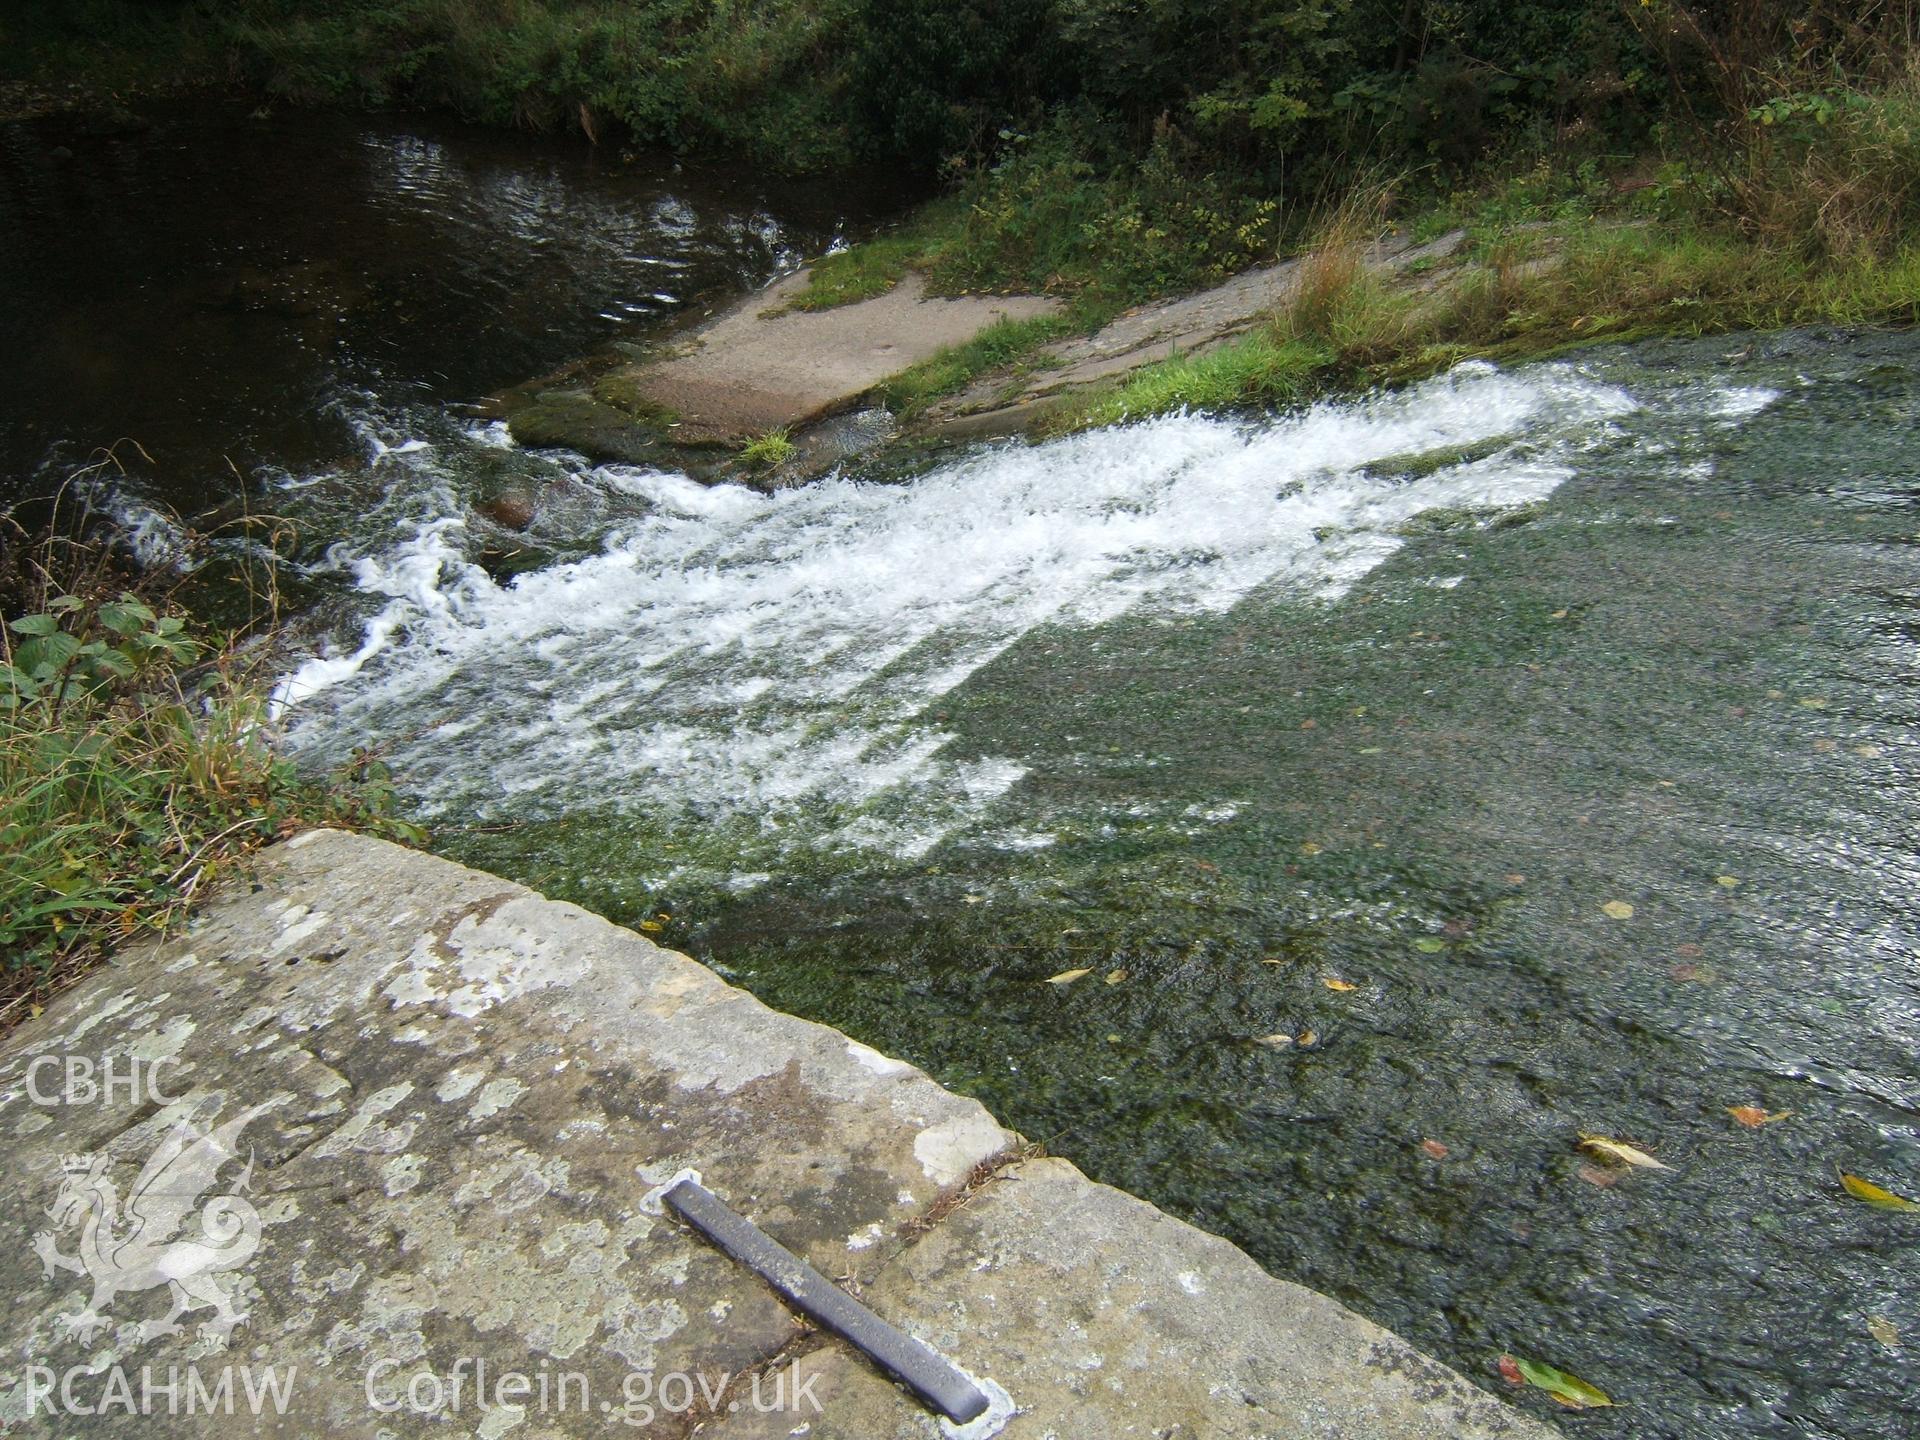 Weir looking downstream from the north.